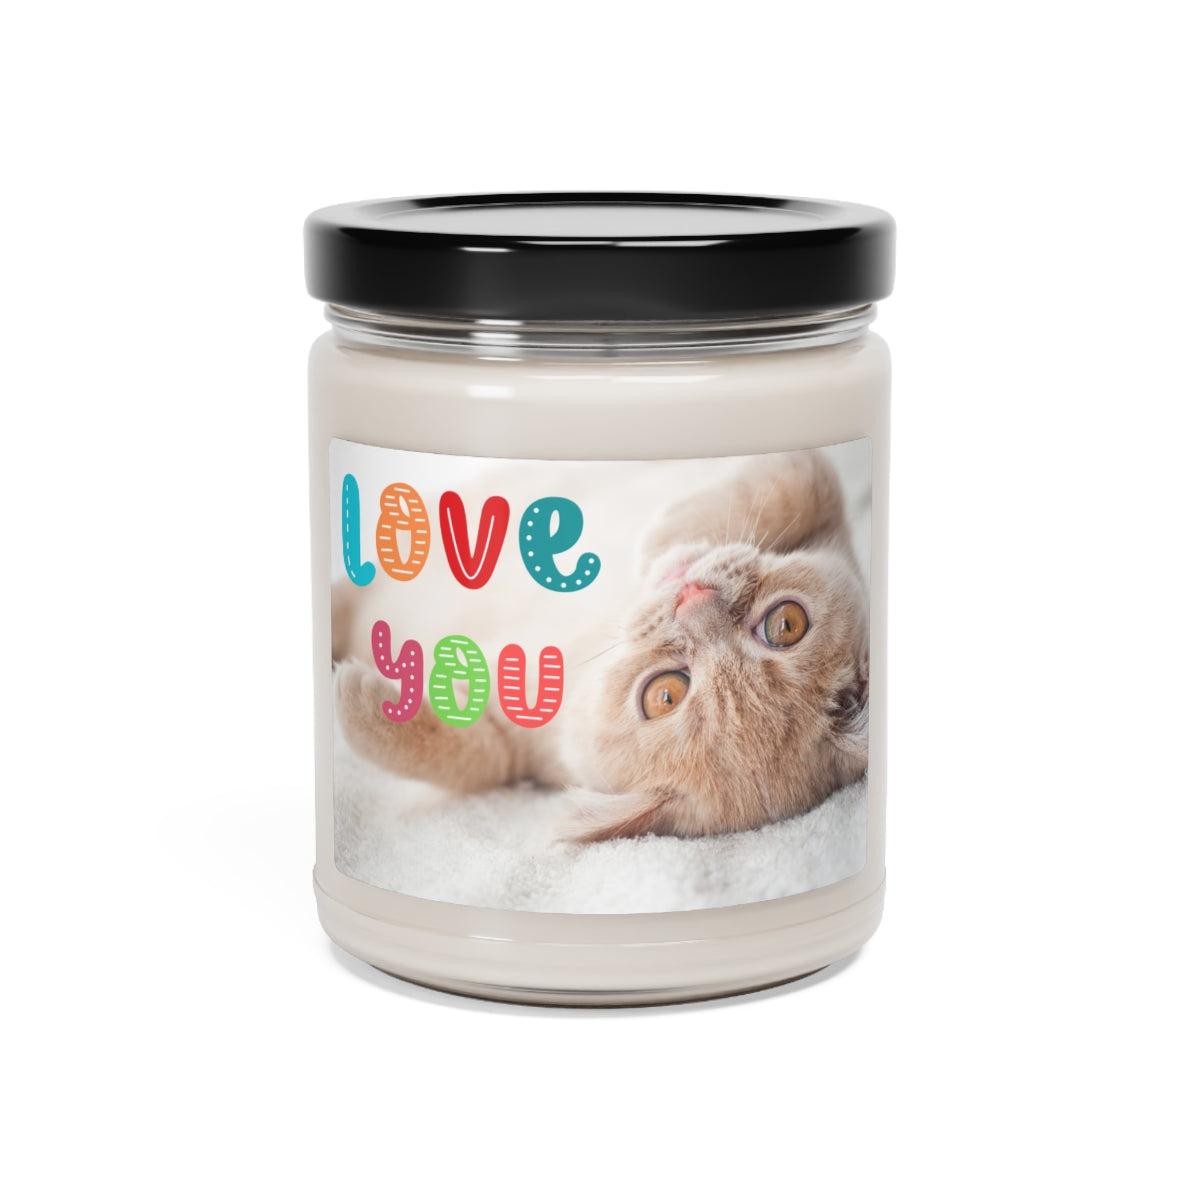 Love you Kitten/ Cat design message gift scented Soy Candle Jar 9oz